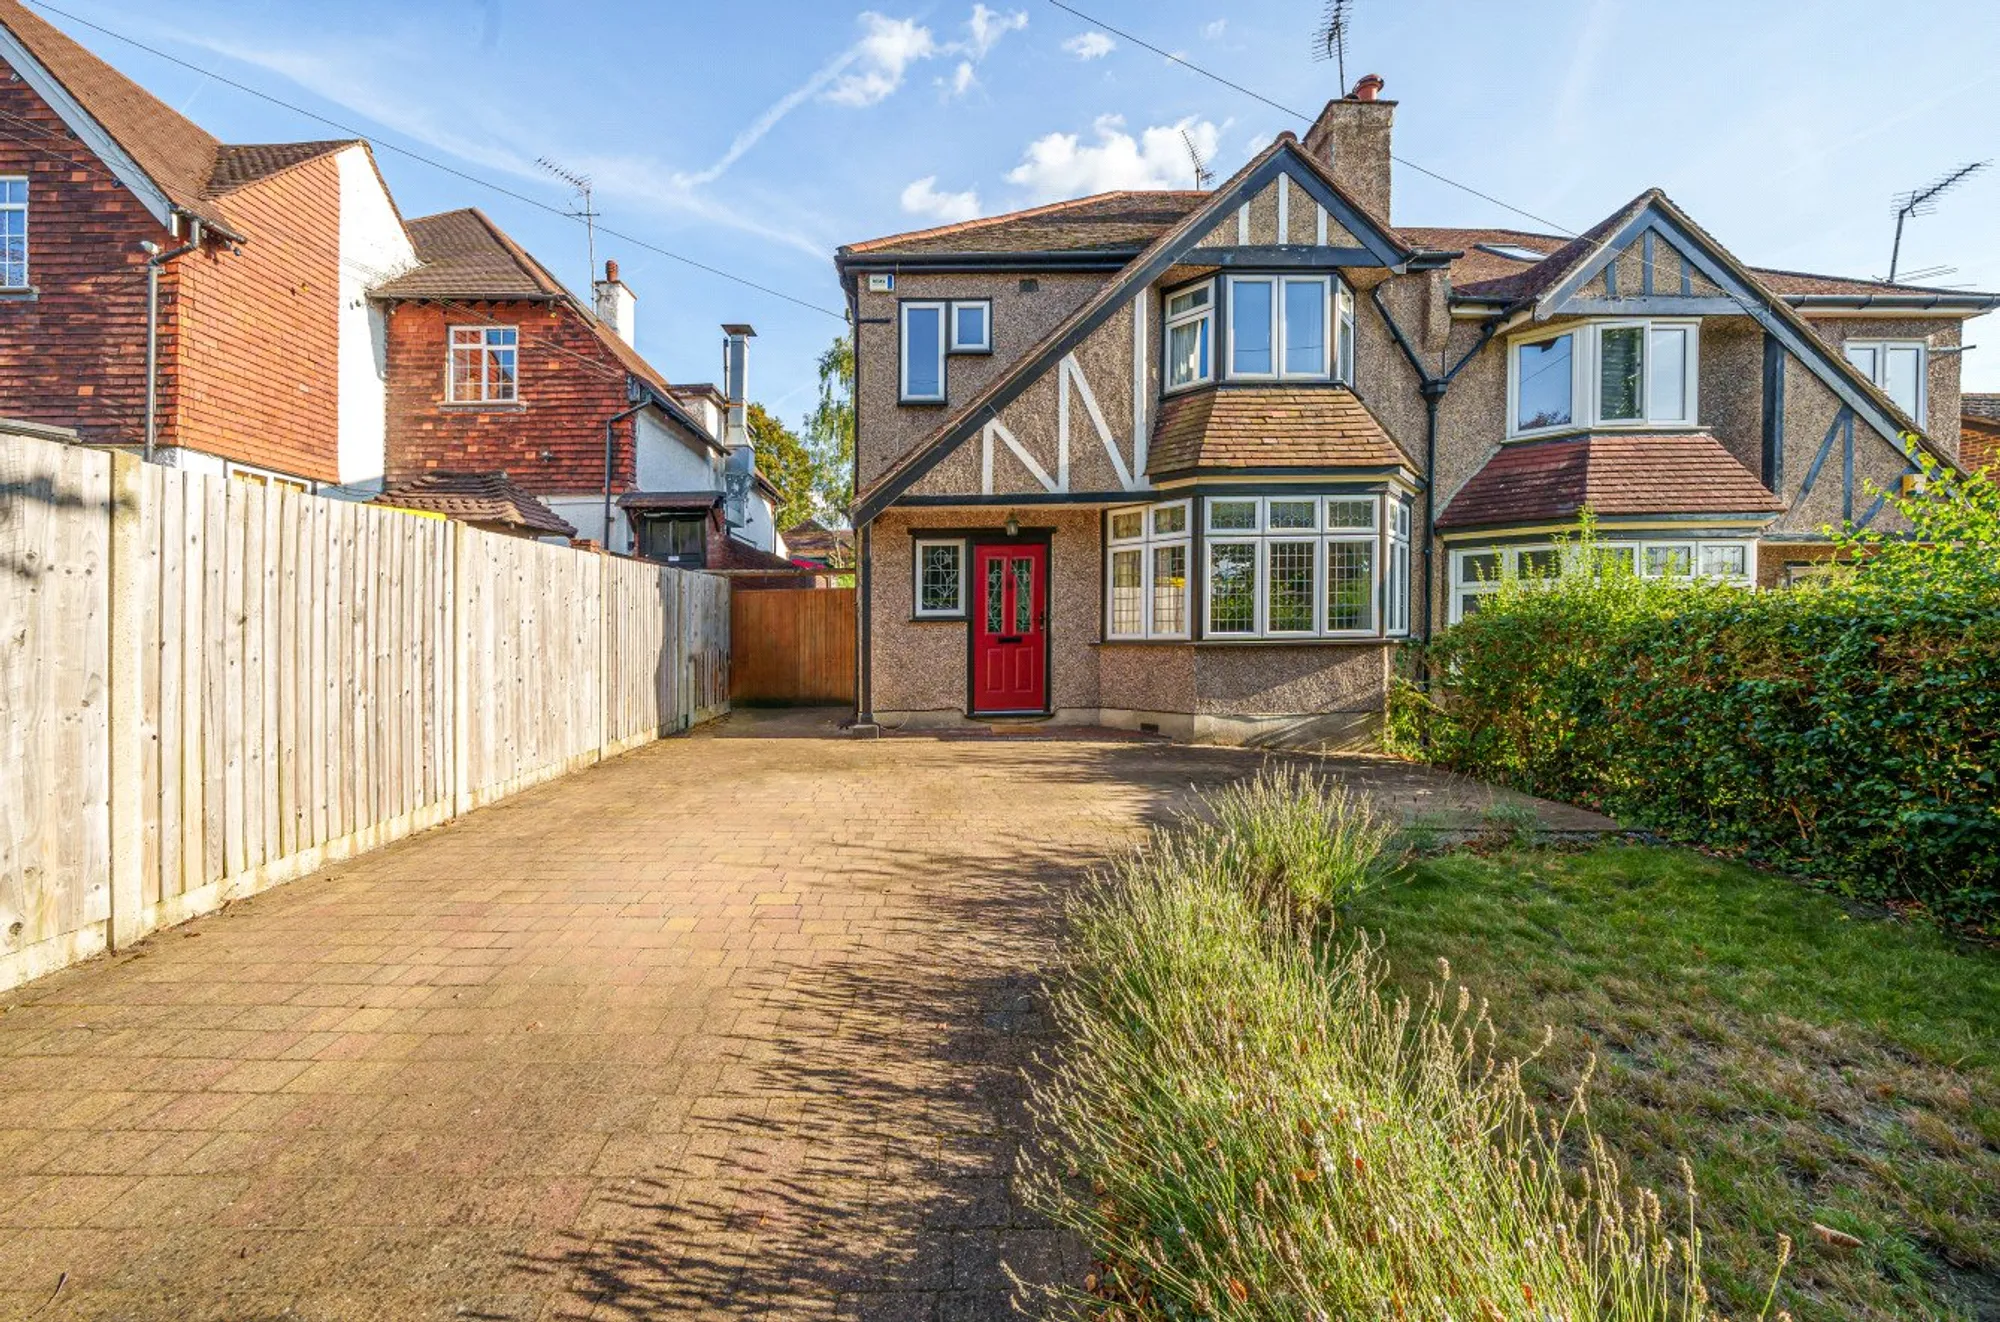 4 bed semi-detached house for sale in Burcott Road, Purley - Property Image 1